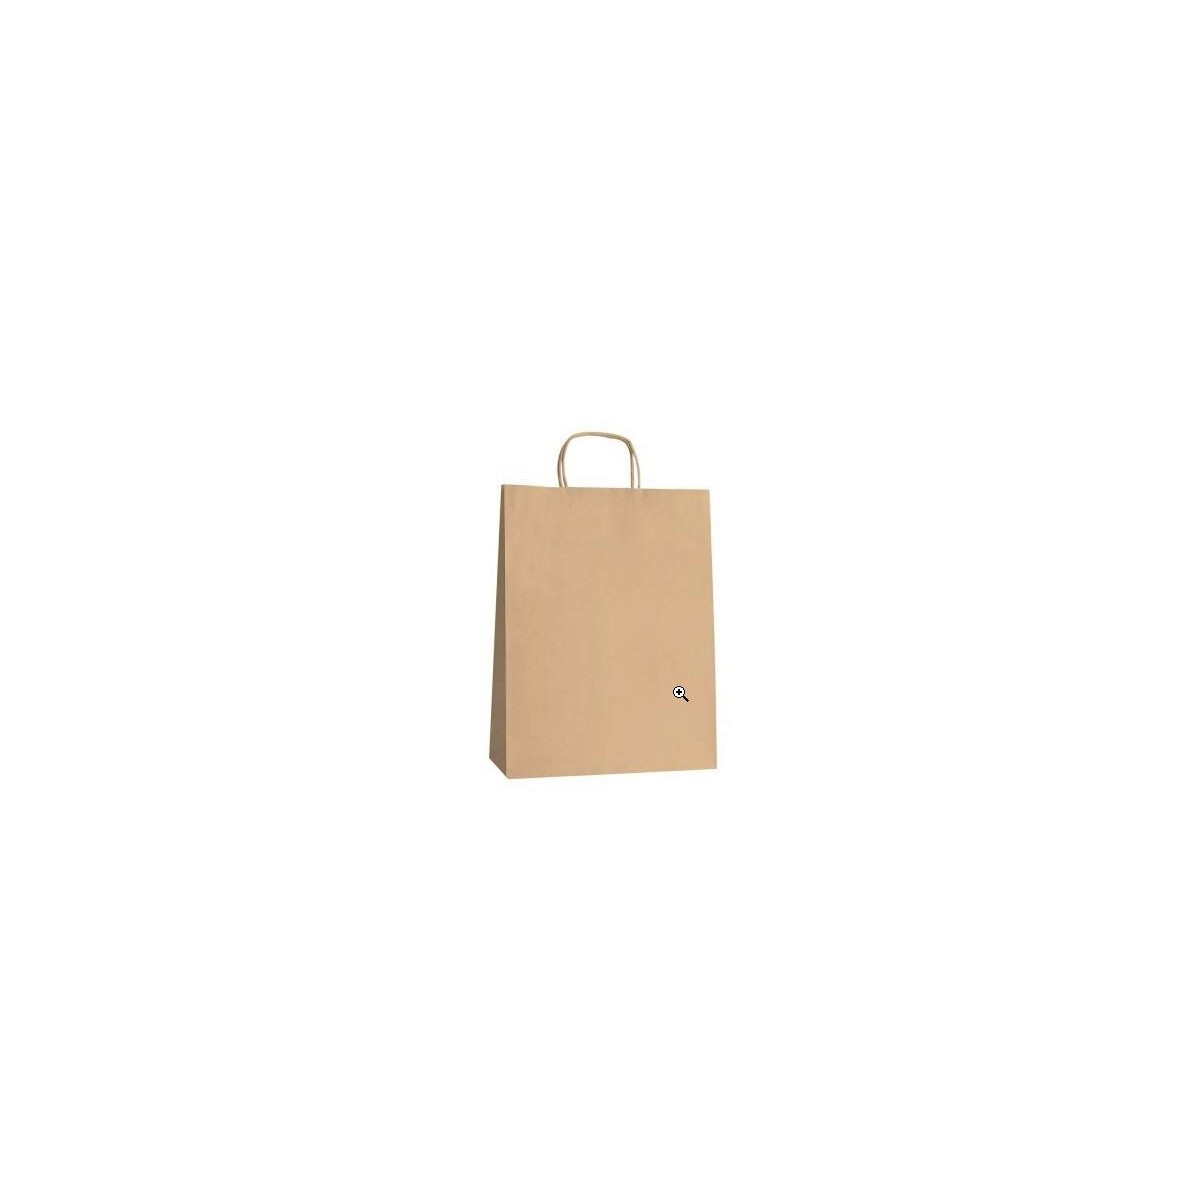 BROWN PAPER SUITCASE 30X 30 X 30 CM  100 PIECES FOST+2021 INCLUDED  PACKAGE